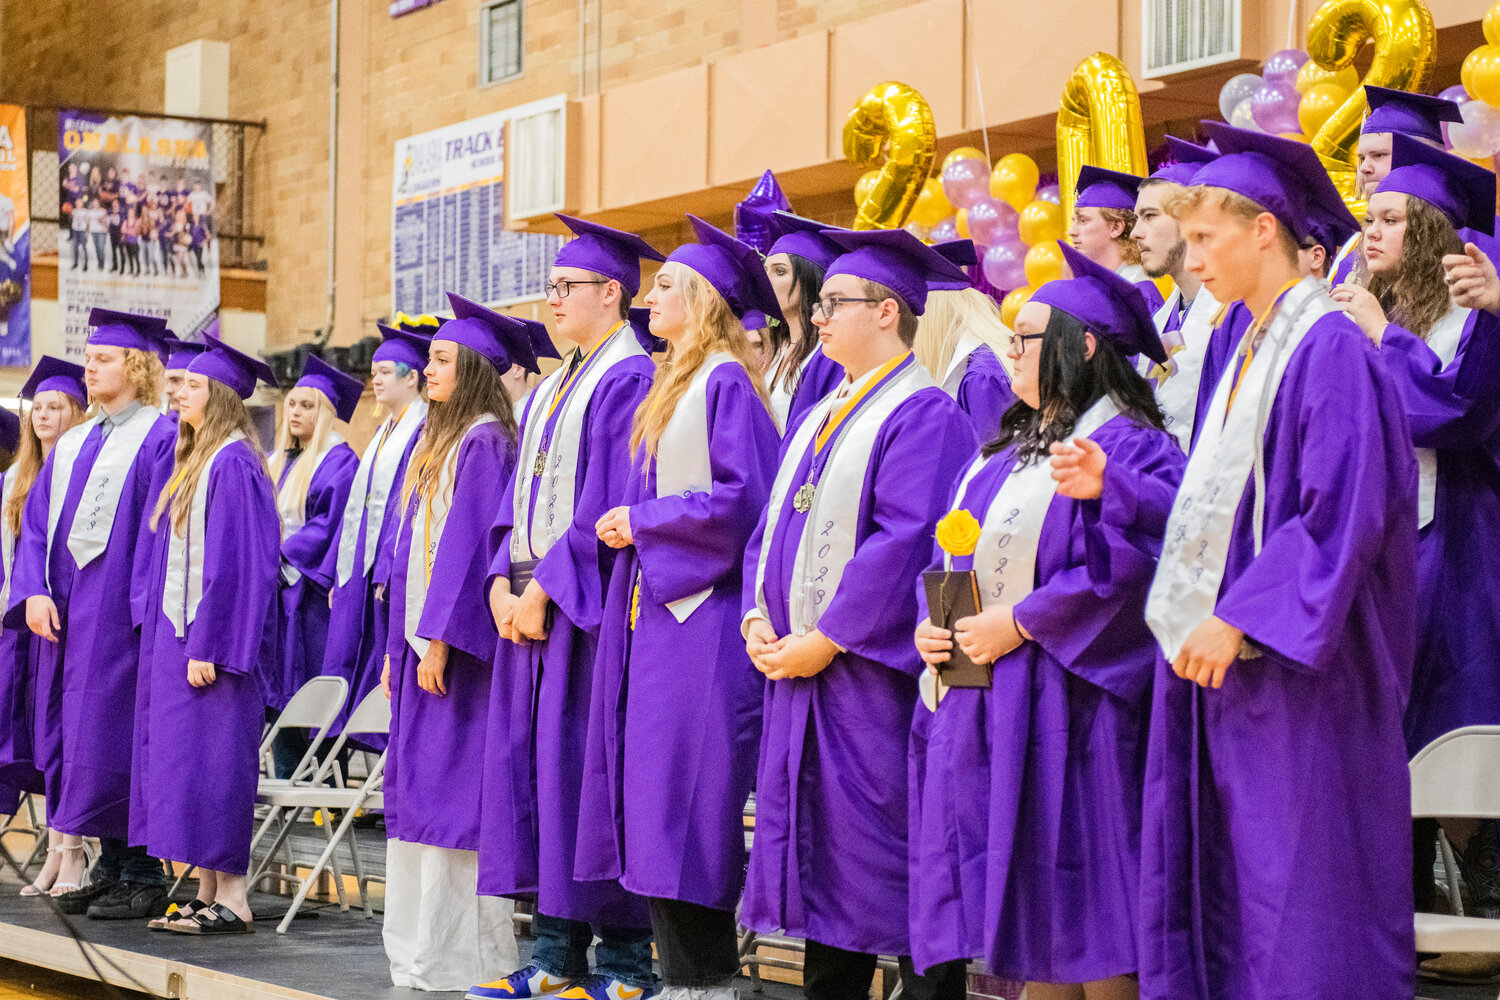 In the Loggers’ gym on Friday night, Onalaska High School’s 100th graduating class of seniors prepares to turn their tassels and leave with their diplomas.